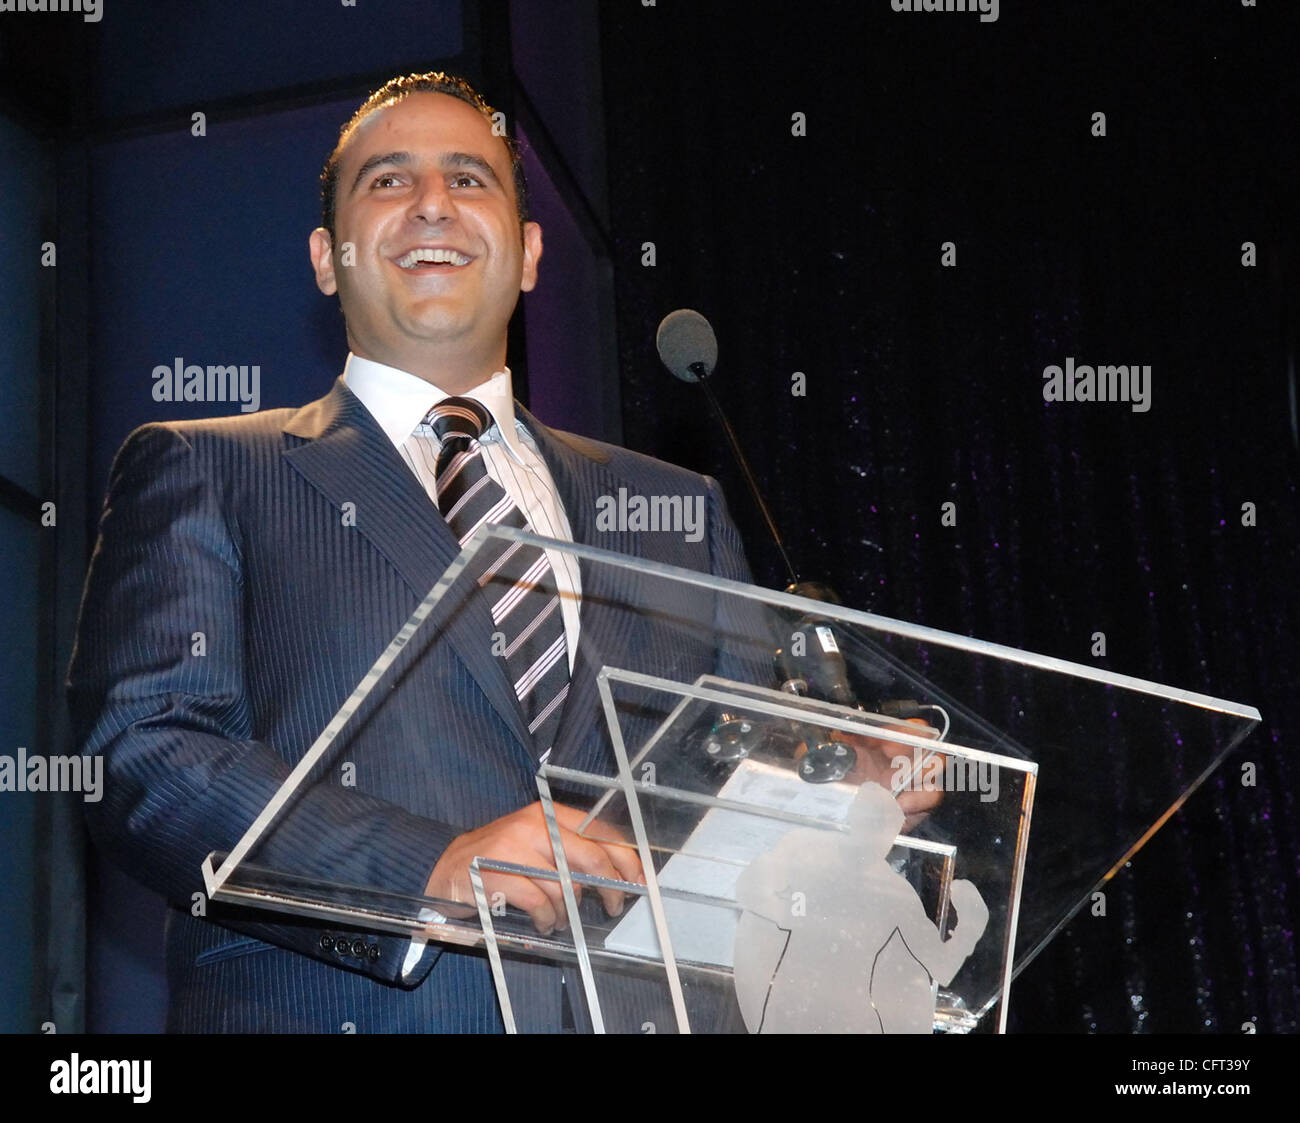 Sam Nazarian attends The 6th Annual Evening of Champions to benefit The Oscar De La Hoya Foundation. 12/6/06, Beverly Hills, CA, Rob DeLorenzo Stock Photo